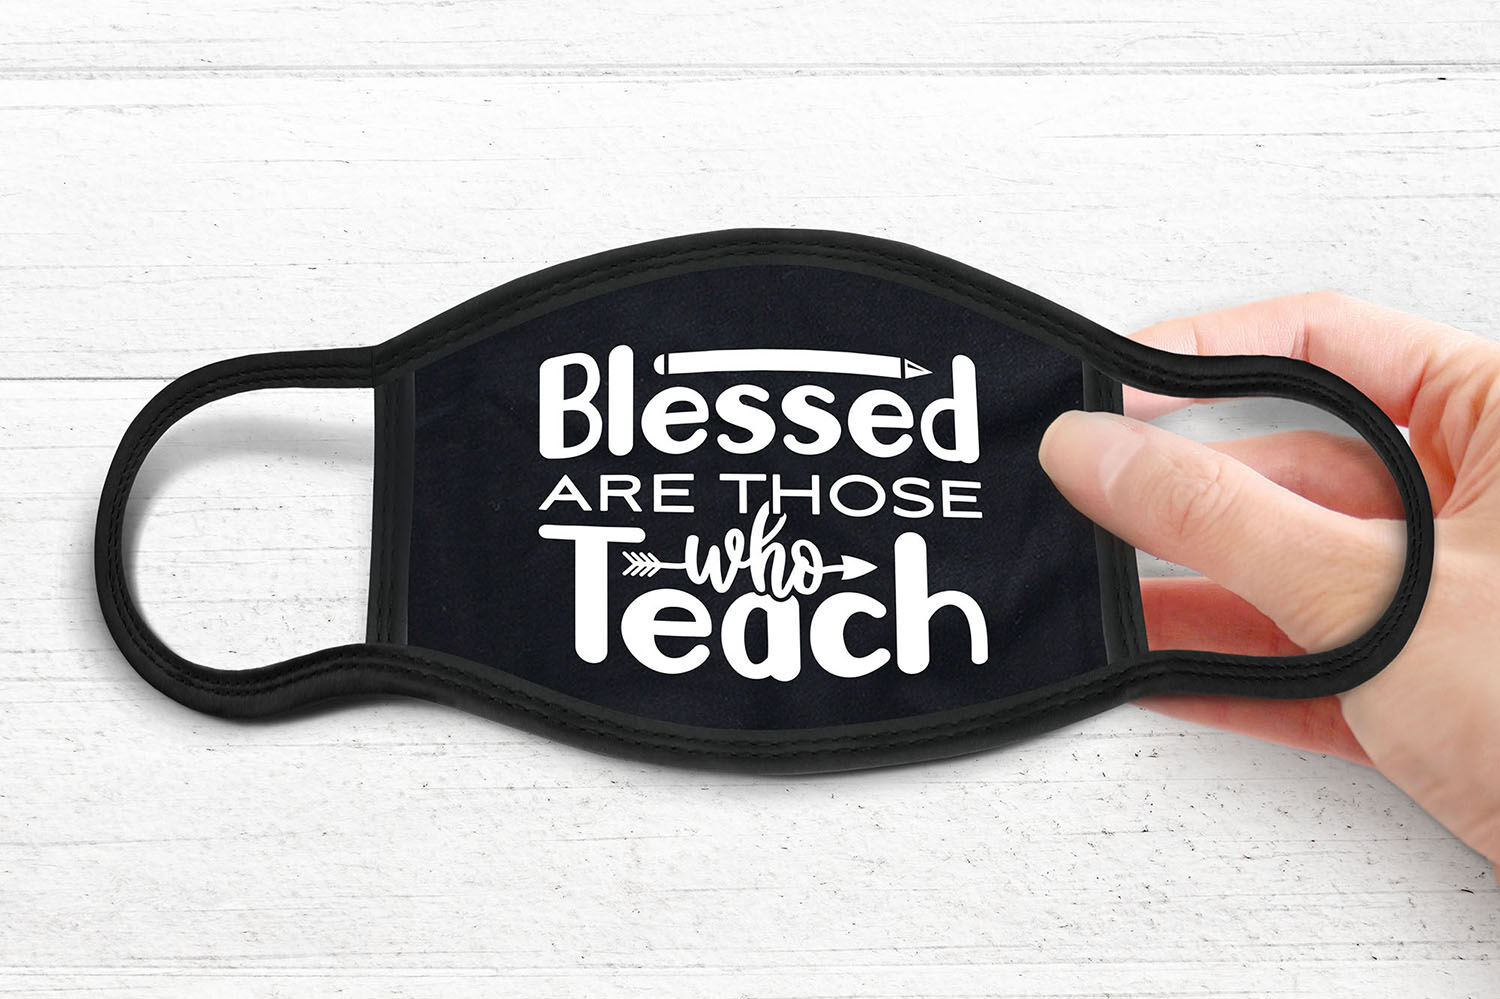 Download Blessed Are Those Who Teach, Face Mask SVG, Mask Quotes SVG By CraftLabSVG | TheHungryJPEG.com